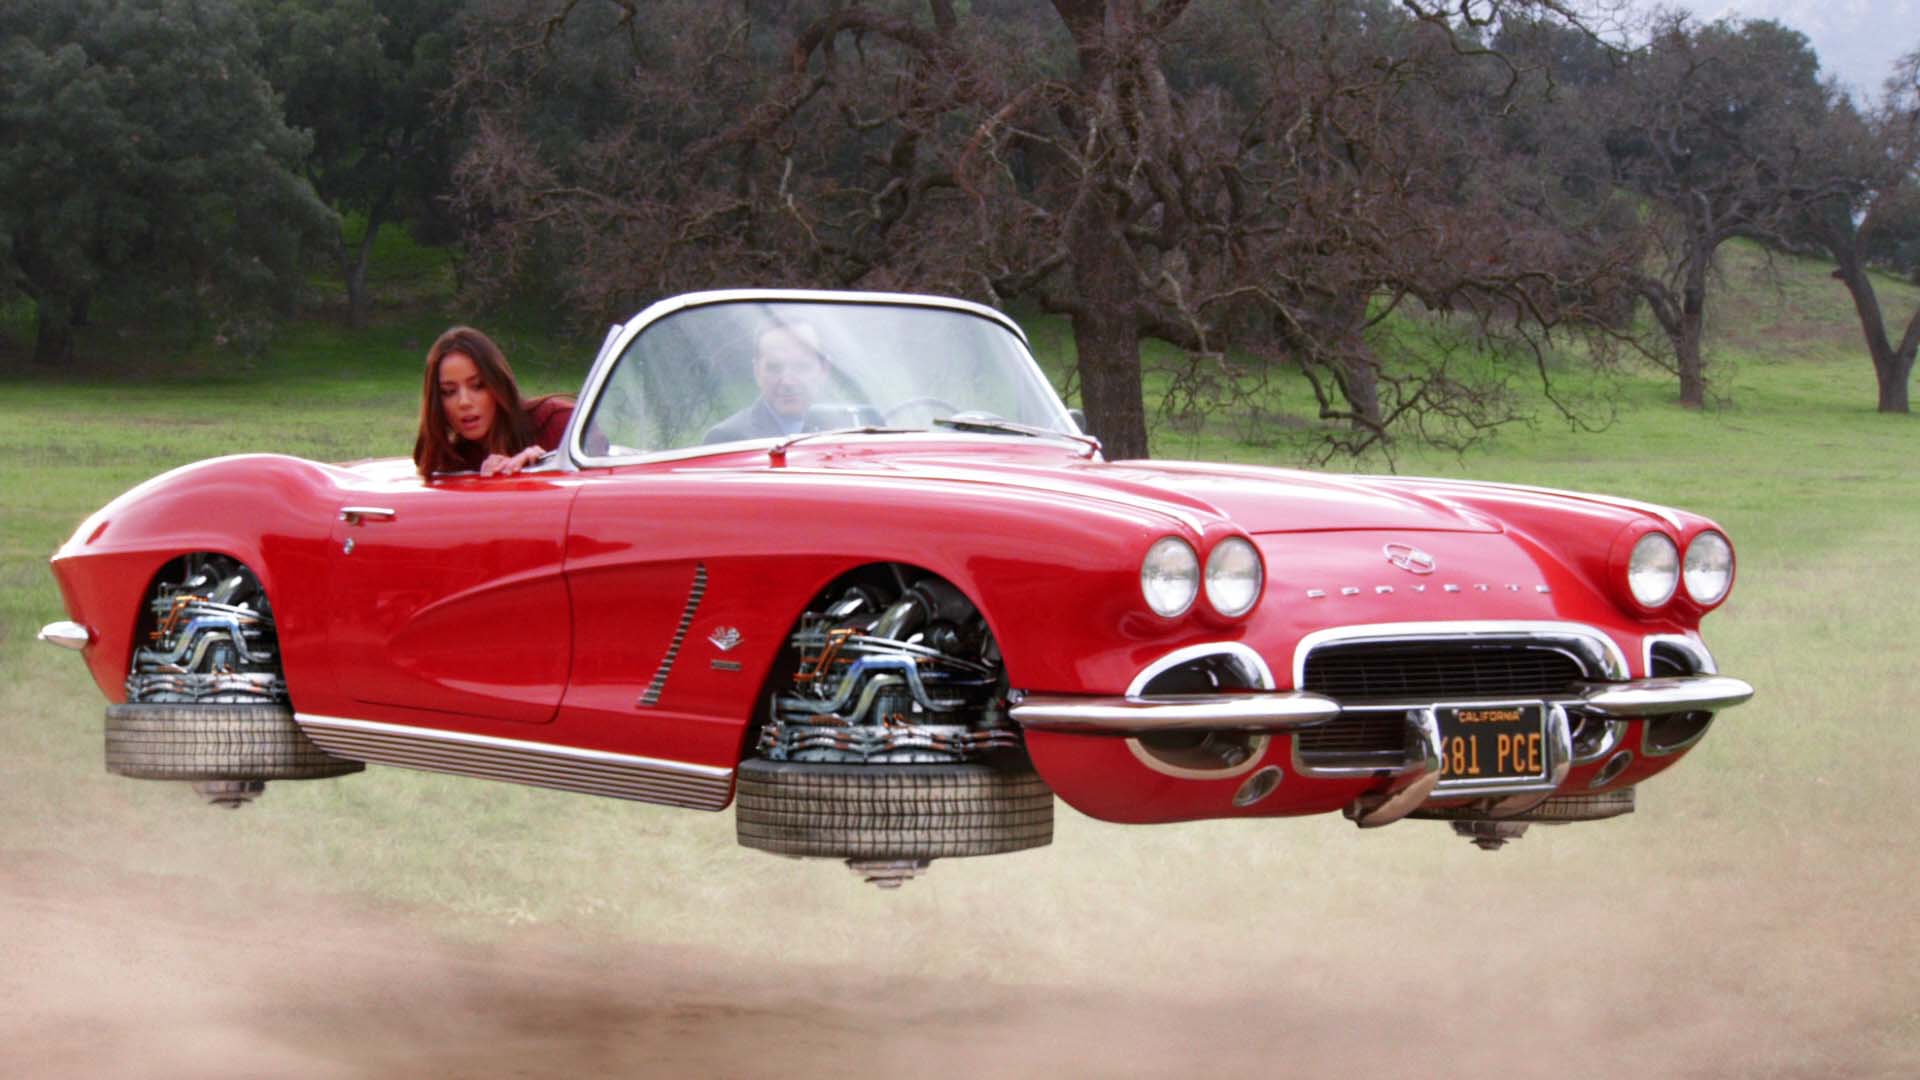 This series is based on the mega-popular Avengers movies, and is led by Agent Coulson (who was killed off in the first movie, but never mind). One criticism of the show is that it bears very little resemblance to the SHIELD from its source comic book series, which dates back to the 60s. Remarkably, the flying car is perhaps the most historical link in the show, as it first appeared way back in a 1967 issue, whereas the other characters here are much more recent creations. In the show, the car is driven by Agent Coulson himself, who is very protective of it, dissuading his friends from even touching it, let alone driving it.